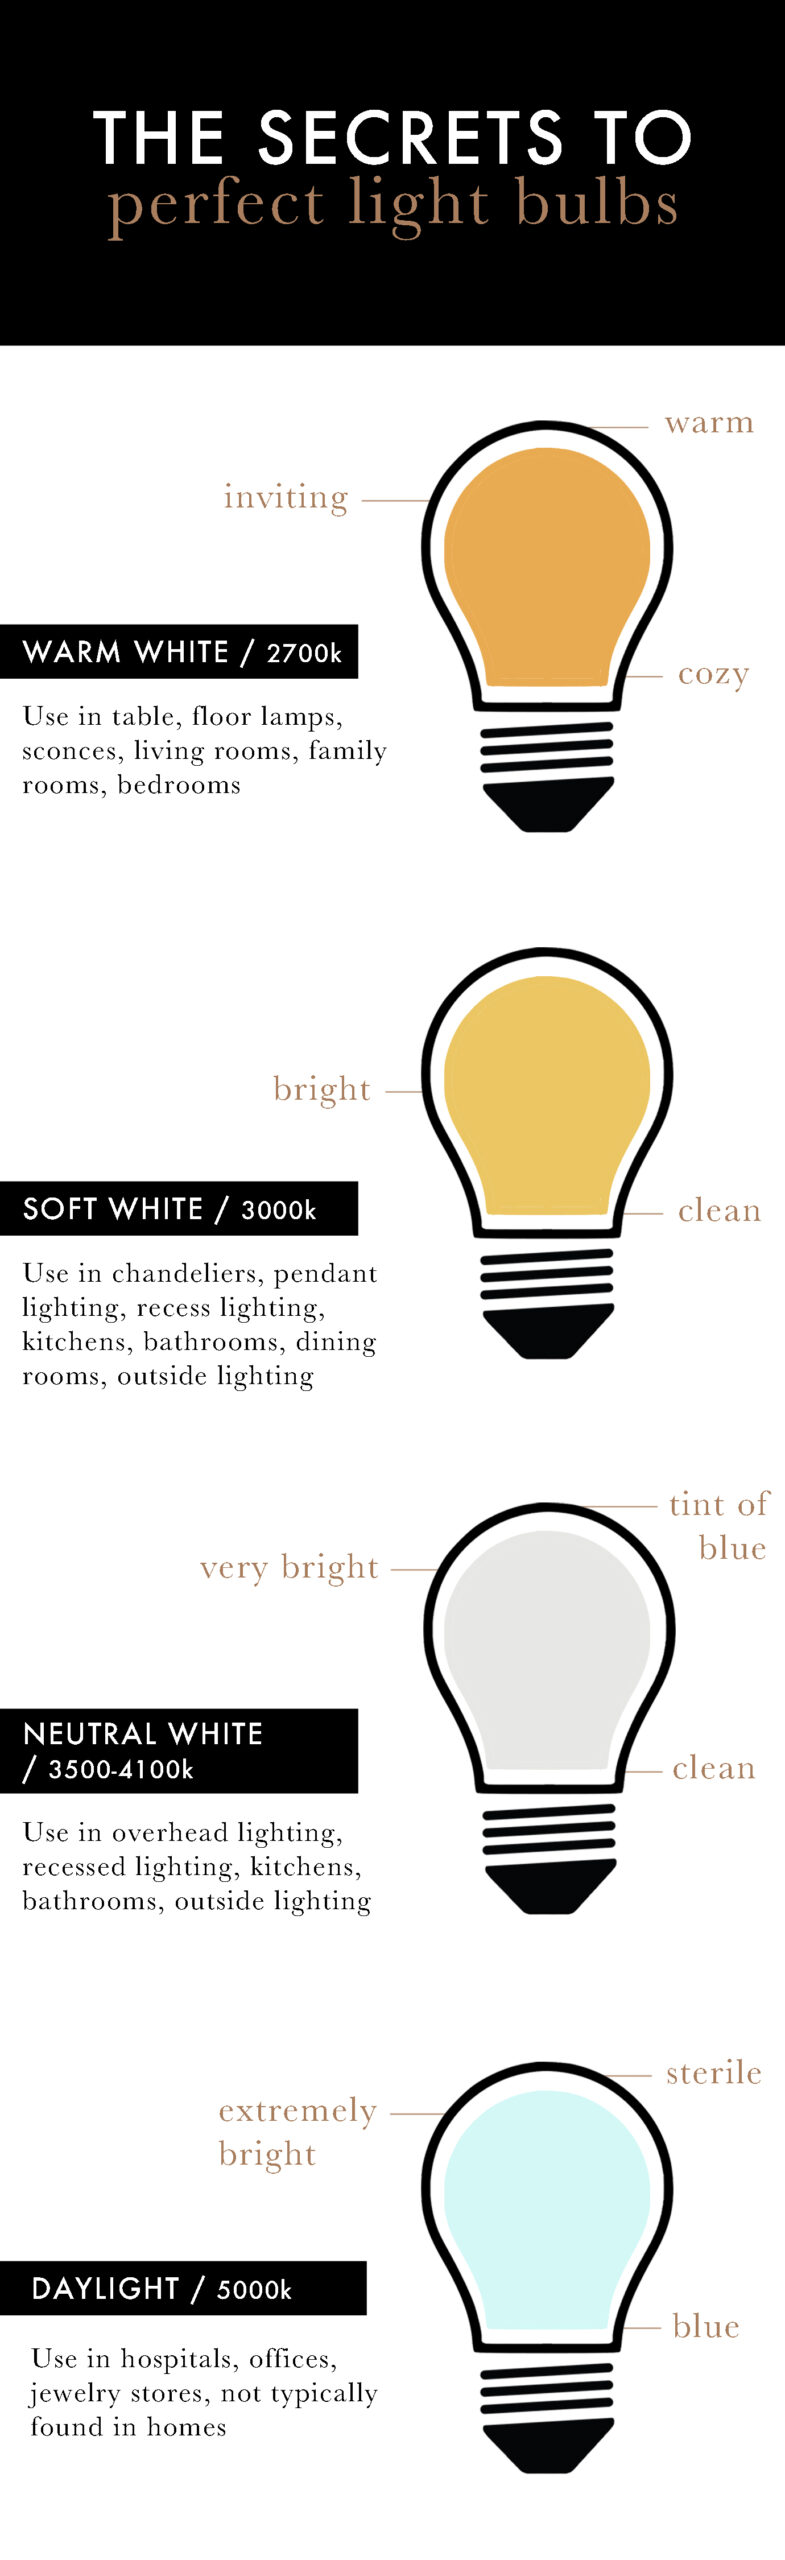 THE SECRETS TO THE PERFECT LIGHT BULBS image 2